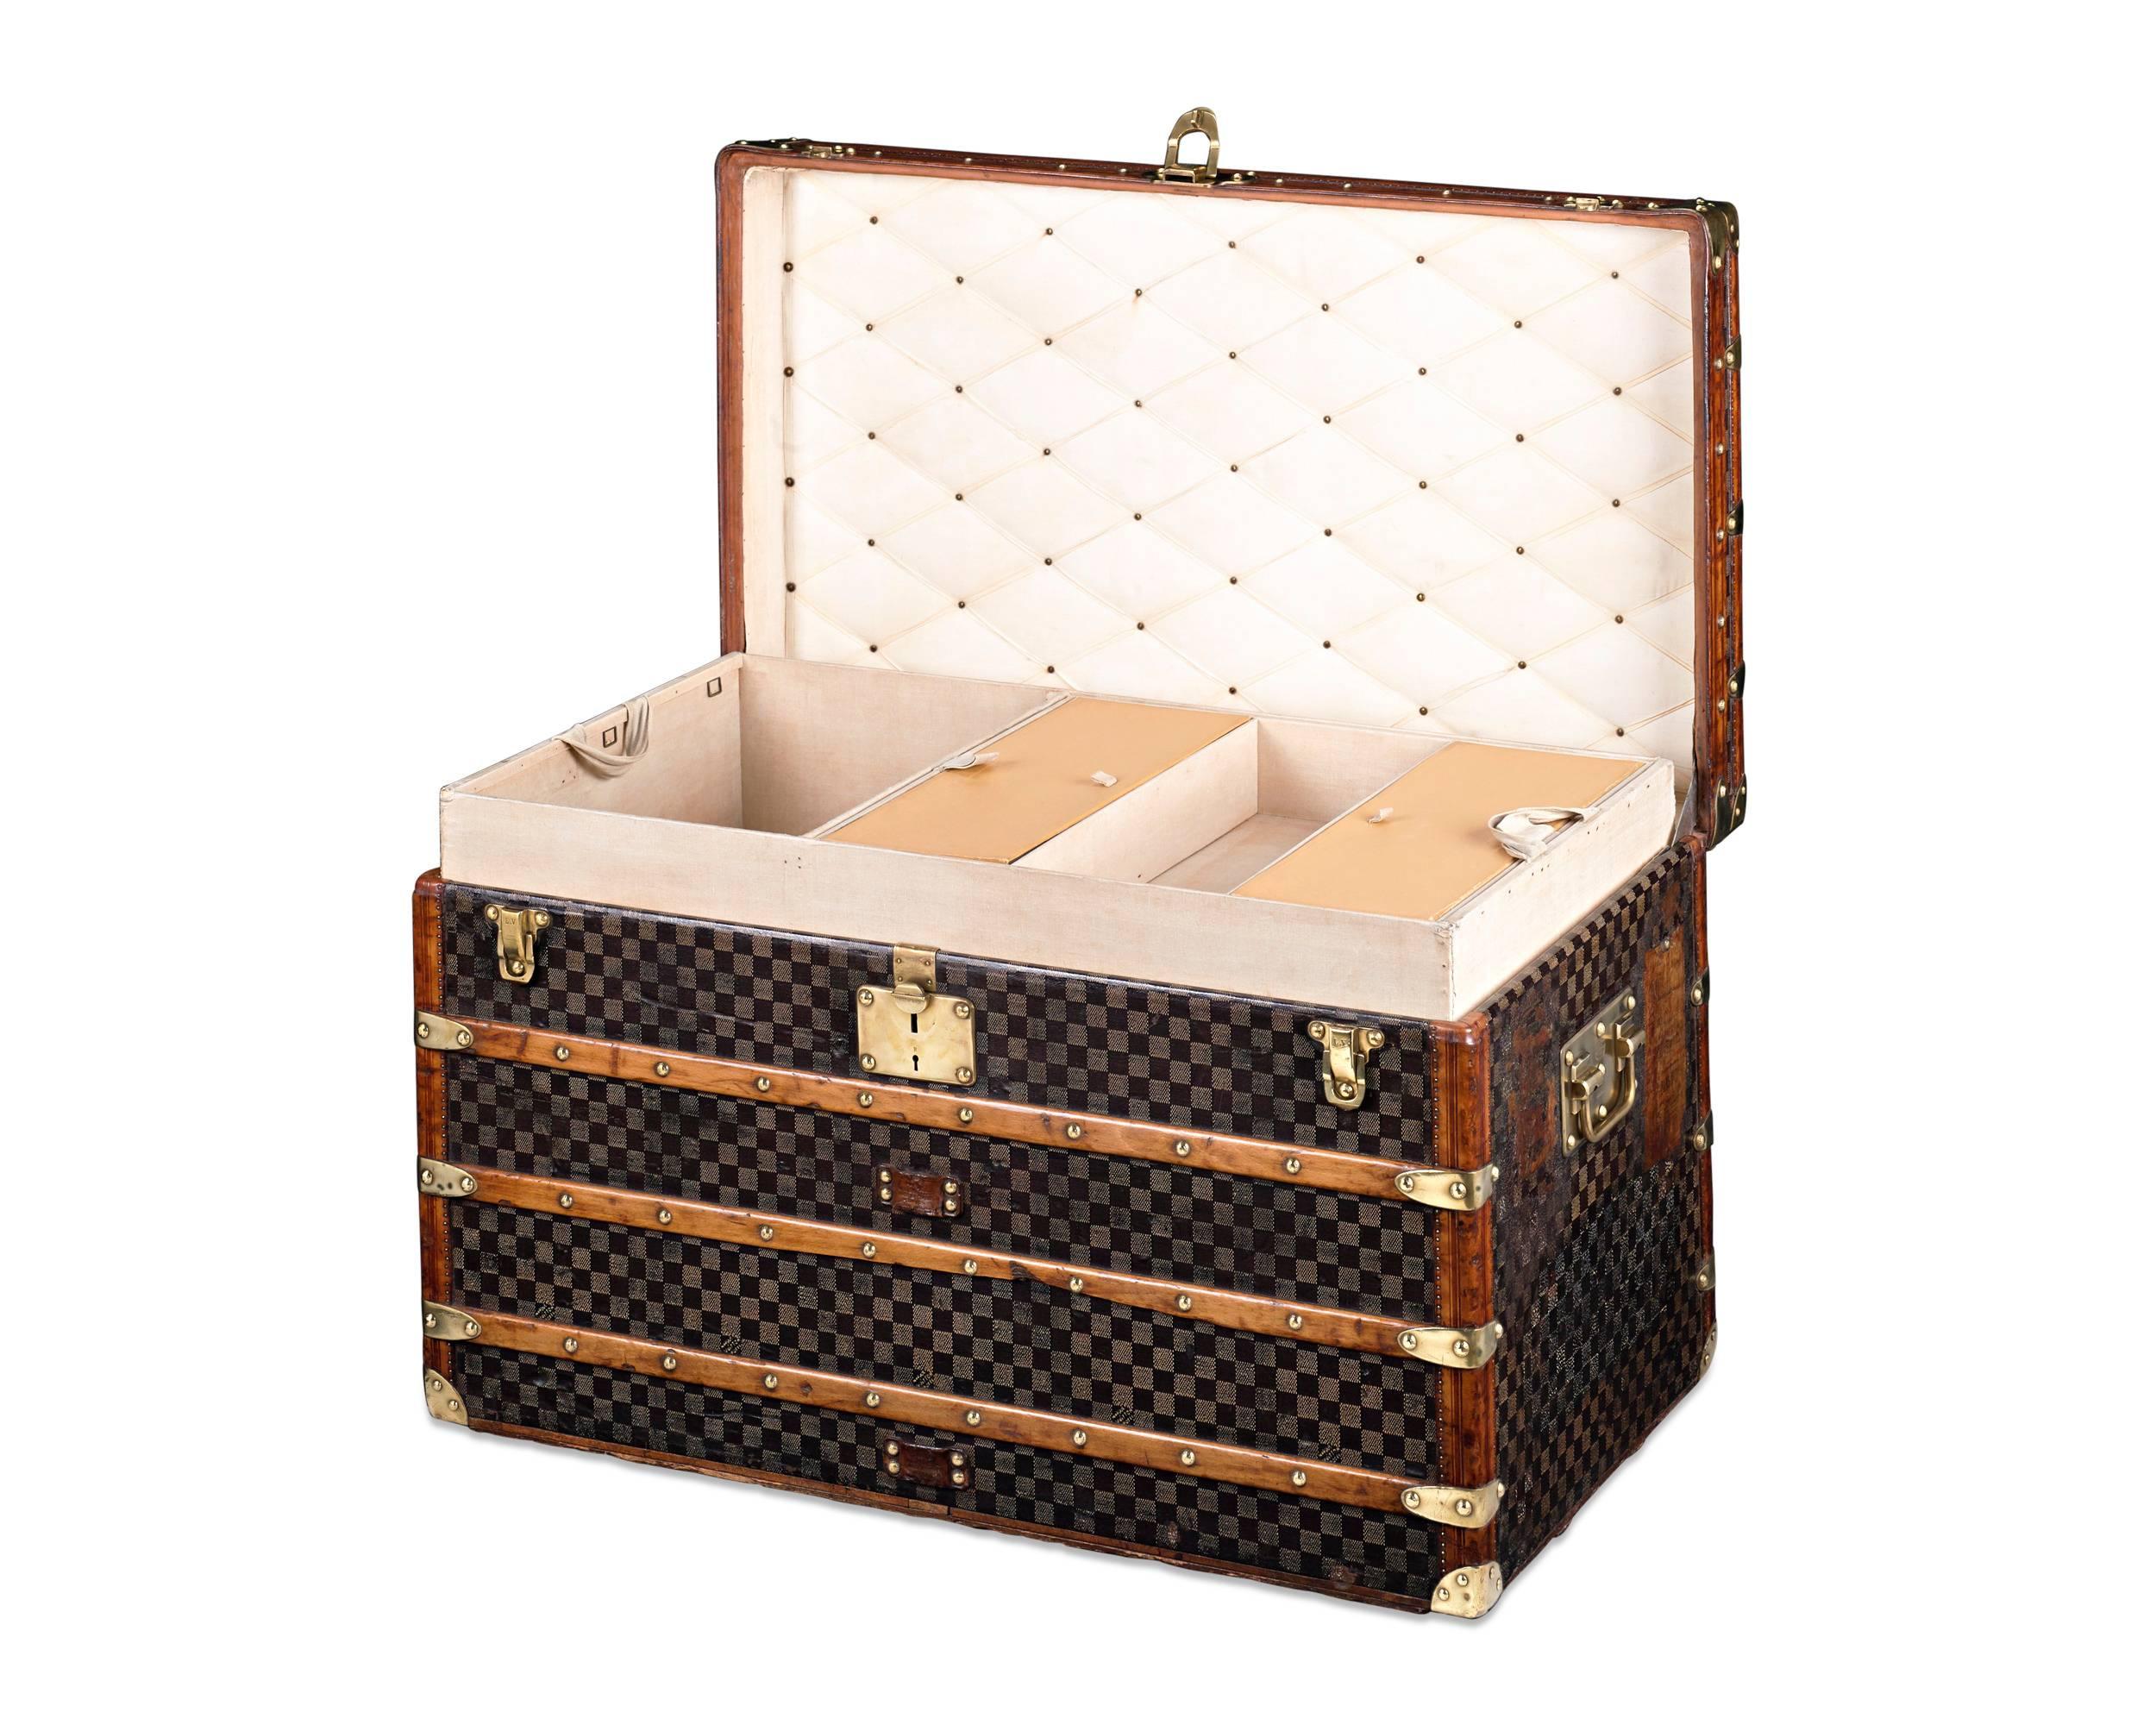 This sophisticated Louis Vuitton steamer trunk evokes the glamour of turn-of-the-century travel. Adorned with Vuitton’s distinctive checked Damier pattern on its canvas covering, this trunk is both elegant and well-crafted, with original brass